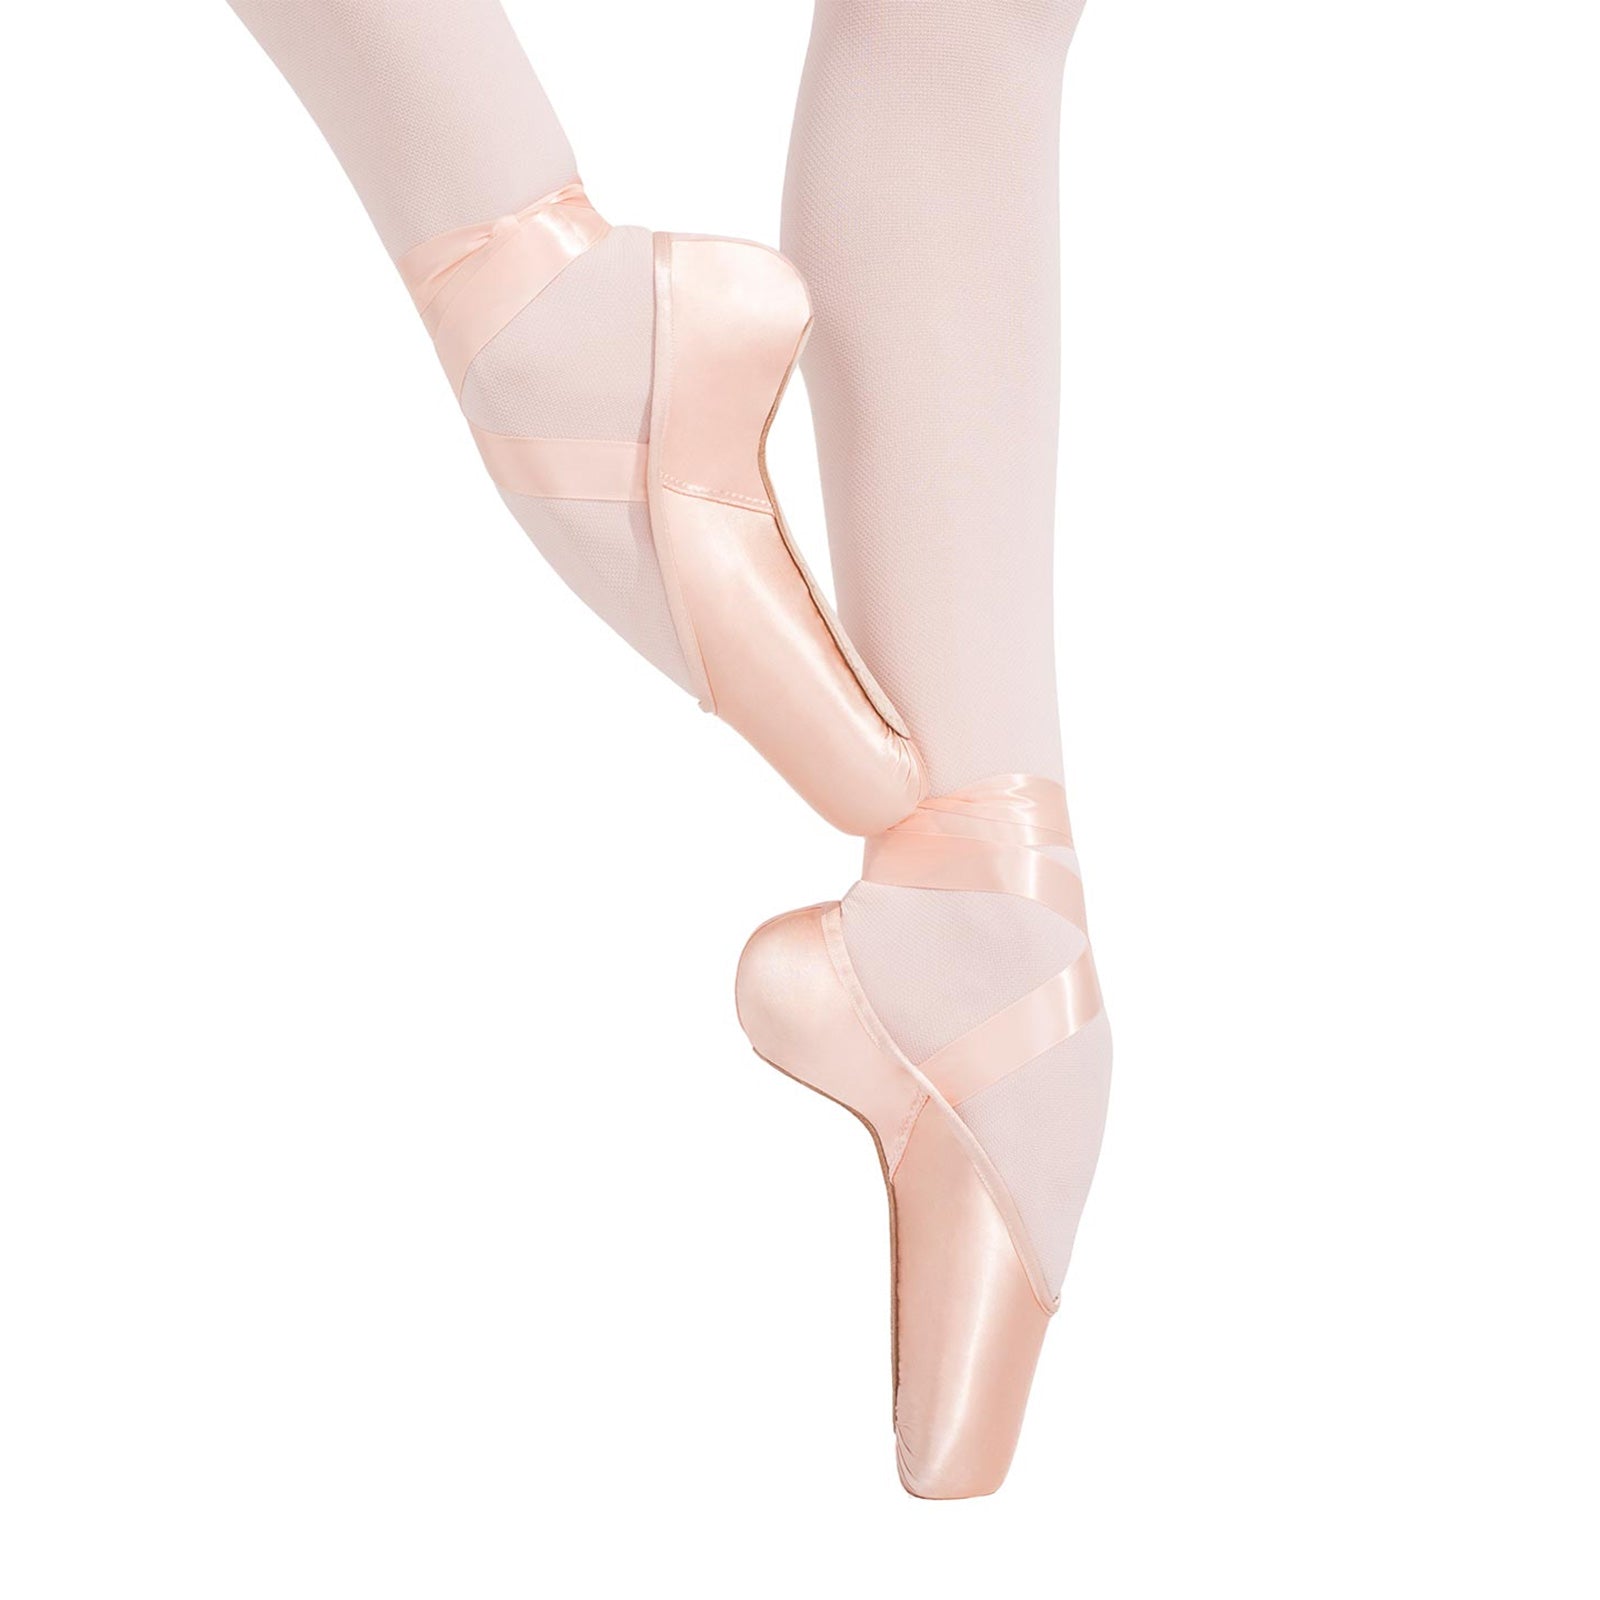 Pad Your Pointe Shoes Like These 4 Pros